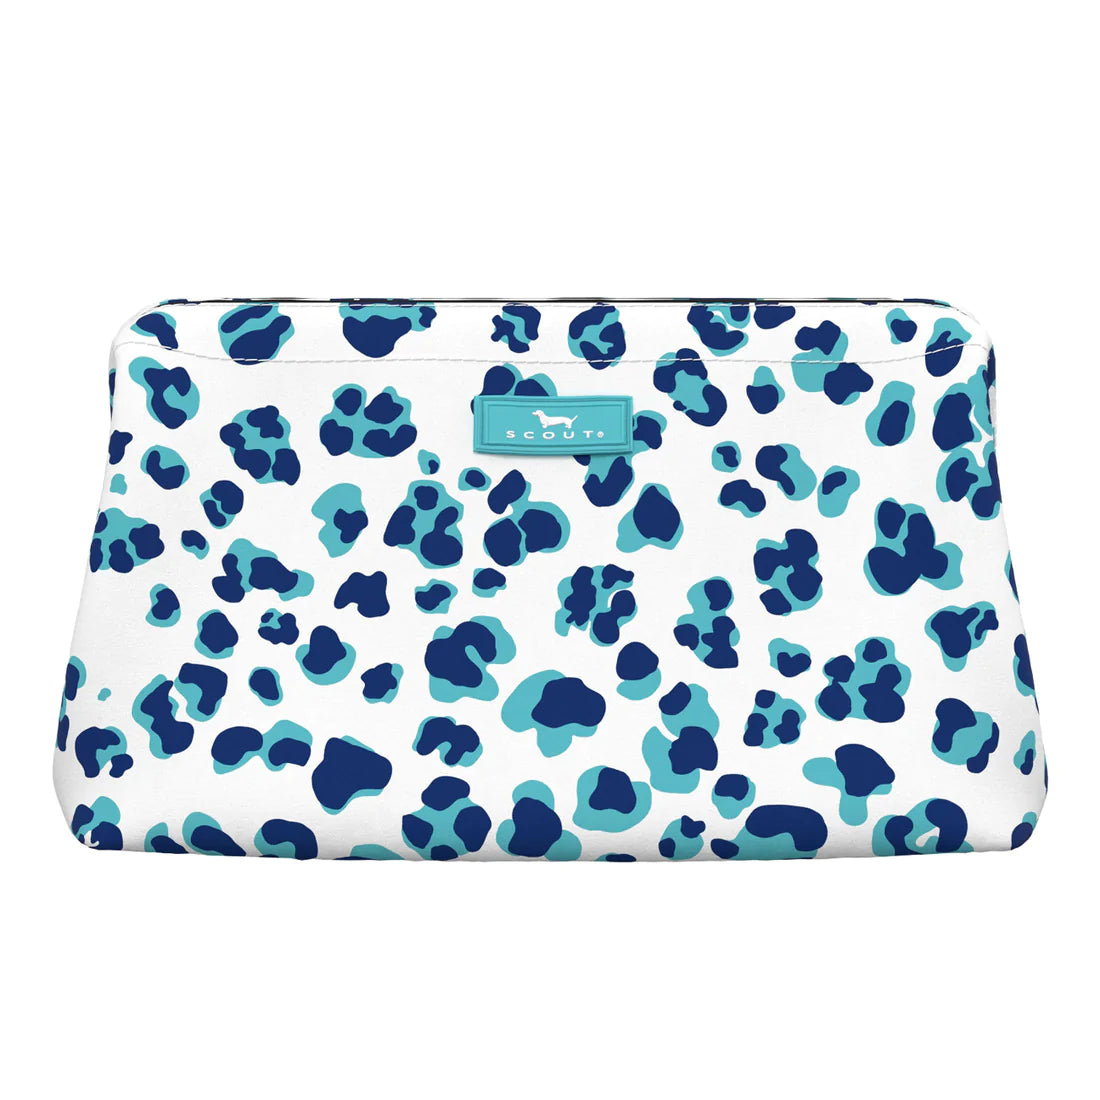 Scout Big Mouth Toiletry Bag - Cool Cat